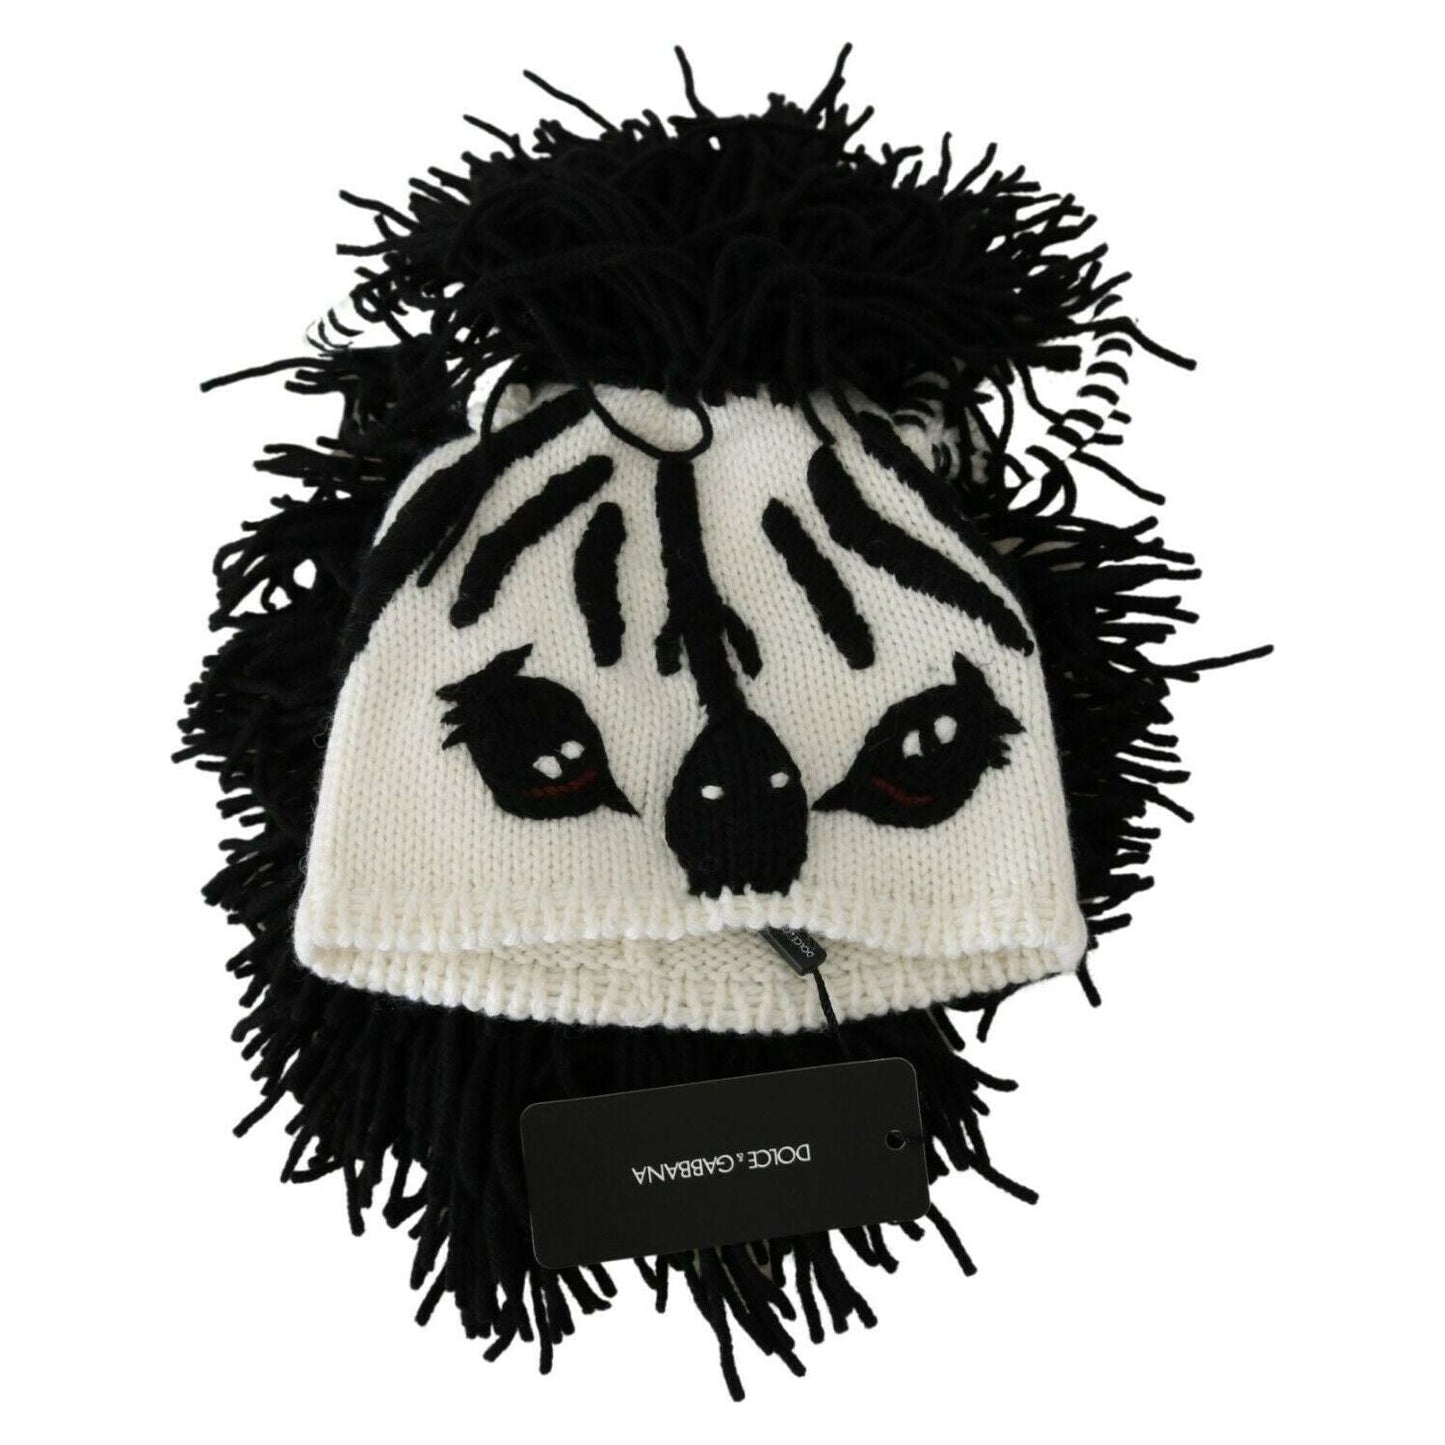 Dolce & Gabbana Black and White Knitted Cashmere Beanie WOMAN HATS black-white-knitted-cashmere-animal-design-hat s-l1600-43-d02e9ce9-55d_550a2453-27b1-4ad0-9e92-efec334e494d.jpg